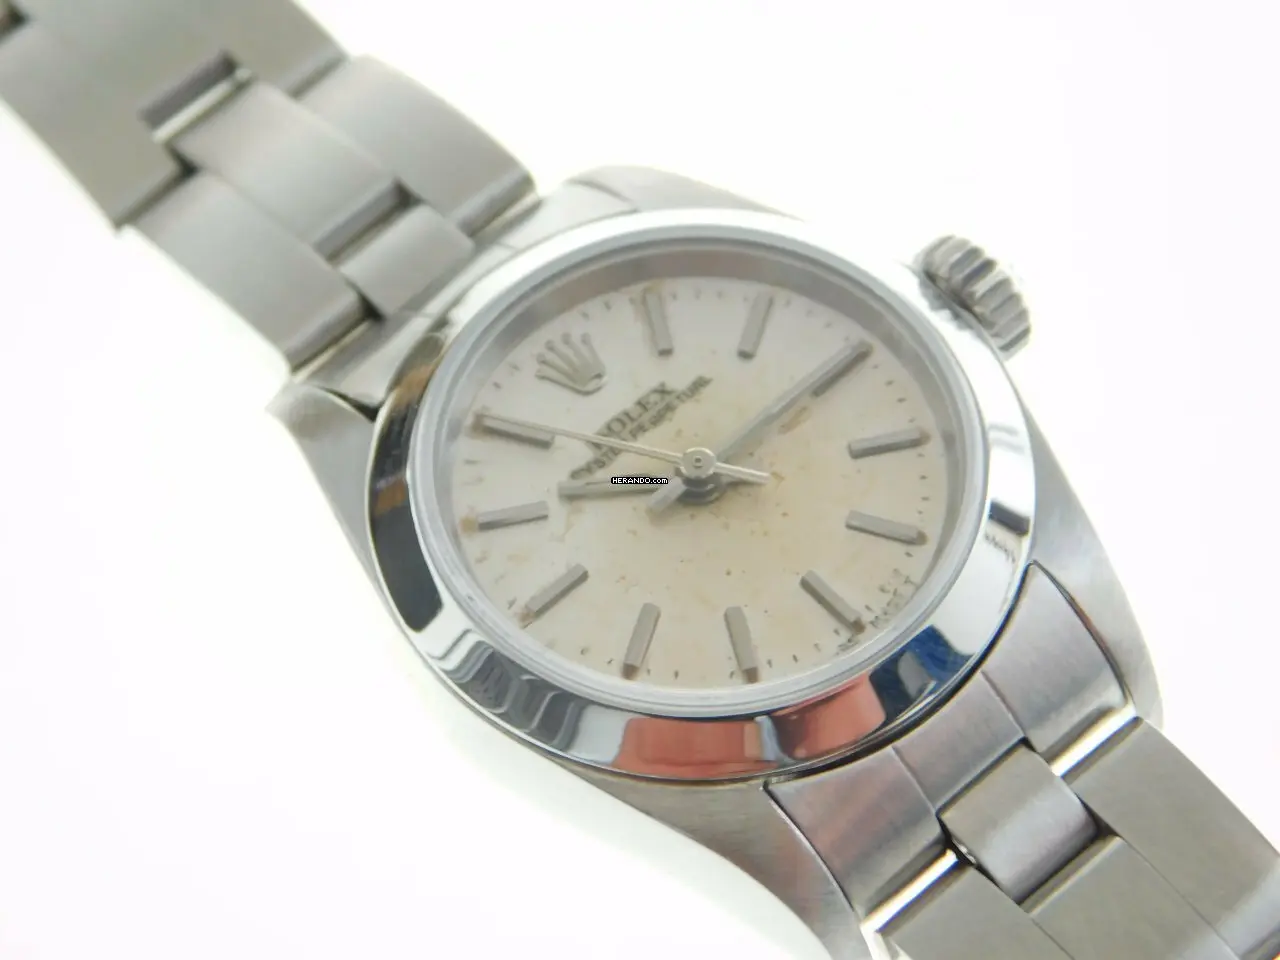 watches-329640-28531009-eej1nnv09e6crp01fkzfc2vt-ExtraLarge.webp